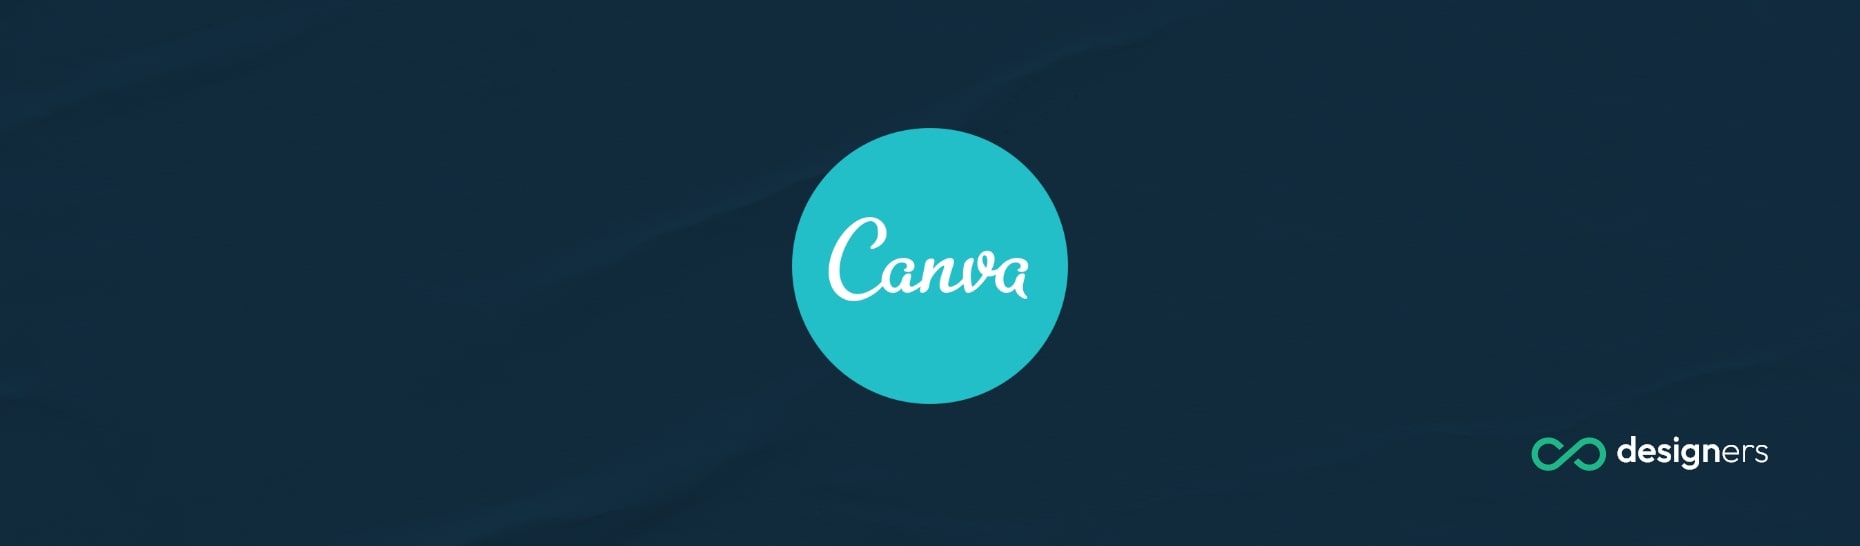 Can Canva Create a Vector File?